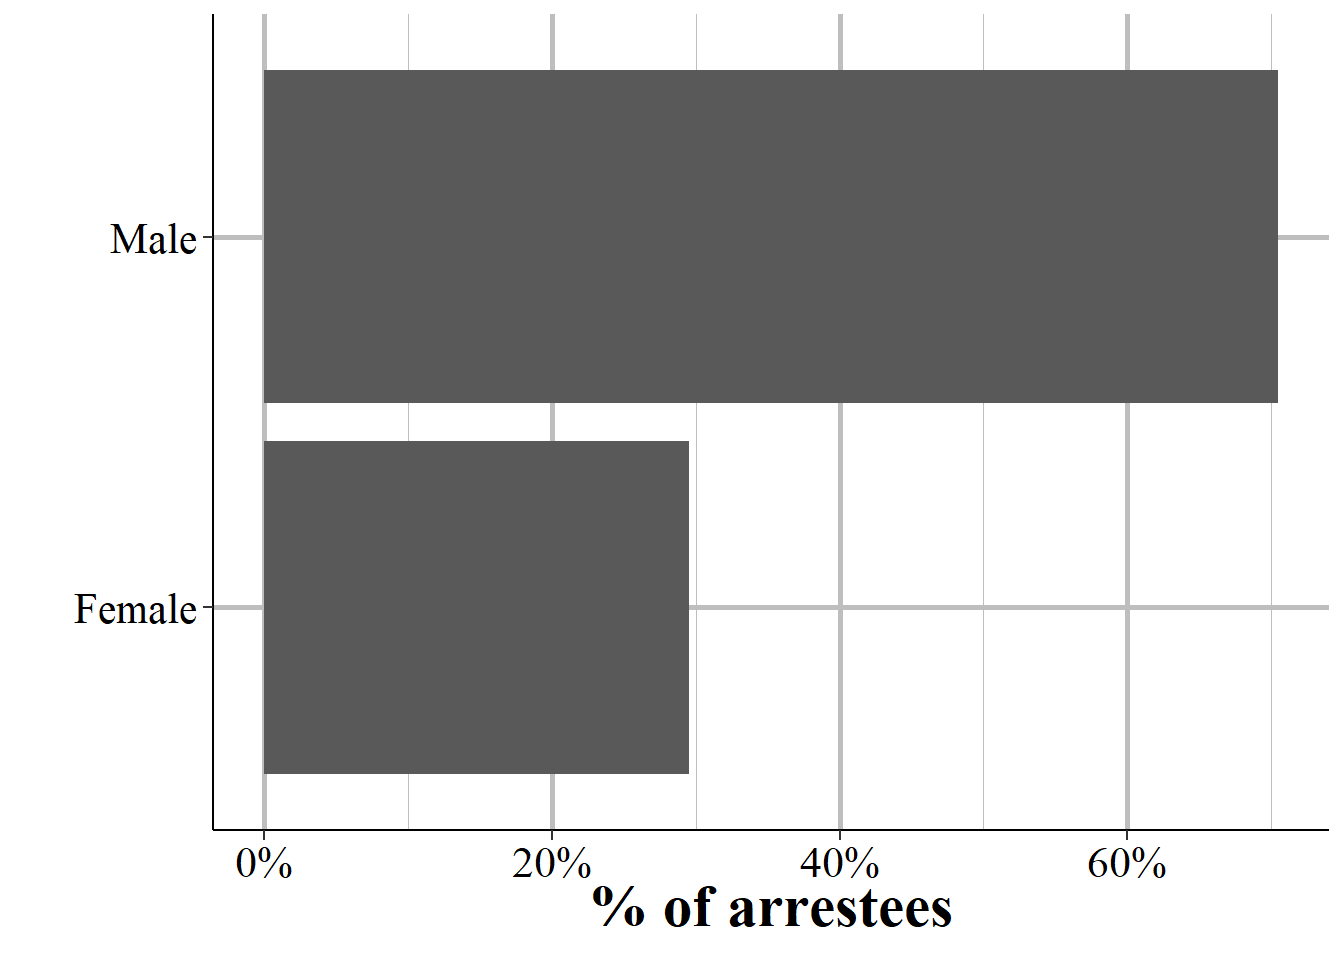 The sex of all arrestees reported in the 2019 NIBRS data.